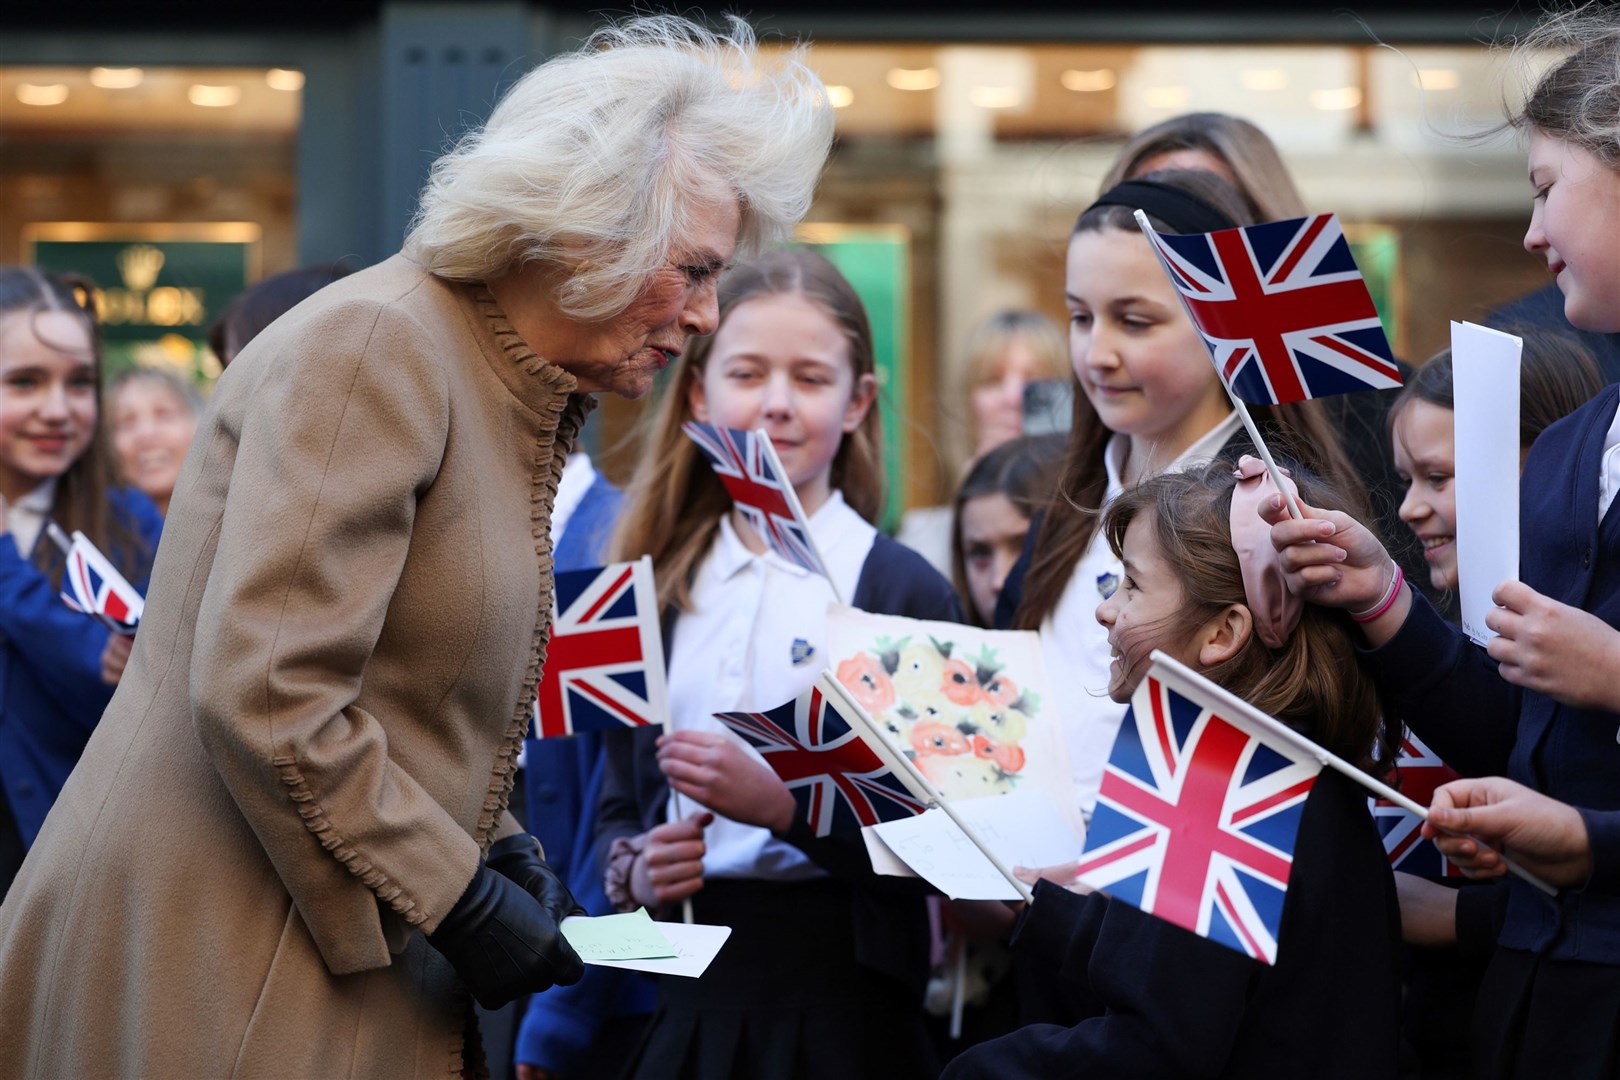 The Queen receiving get well cards for her husband the King in Swindon (Adrian Dennis/PA)